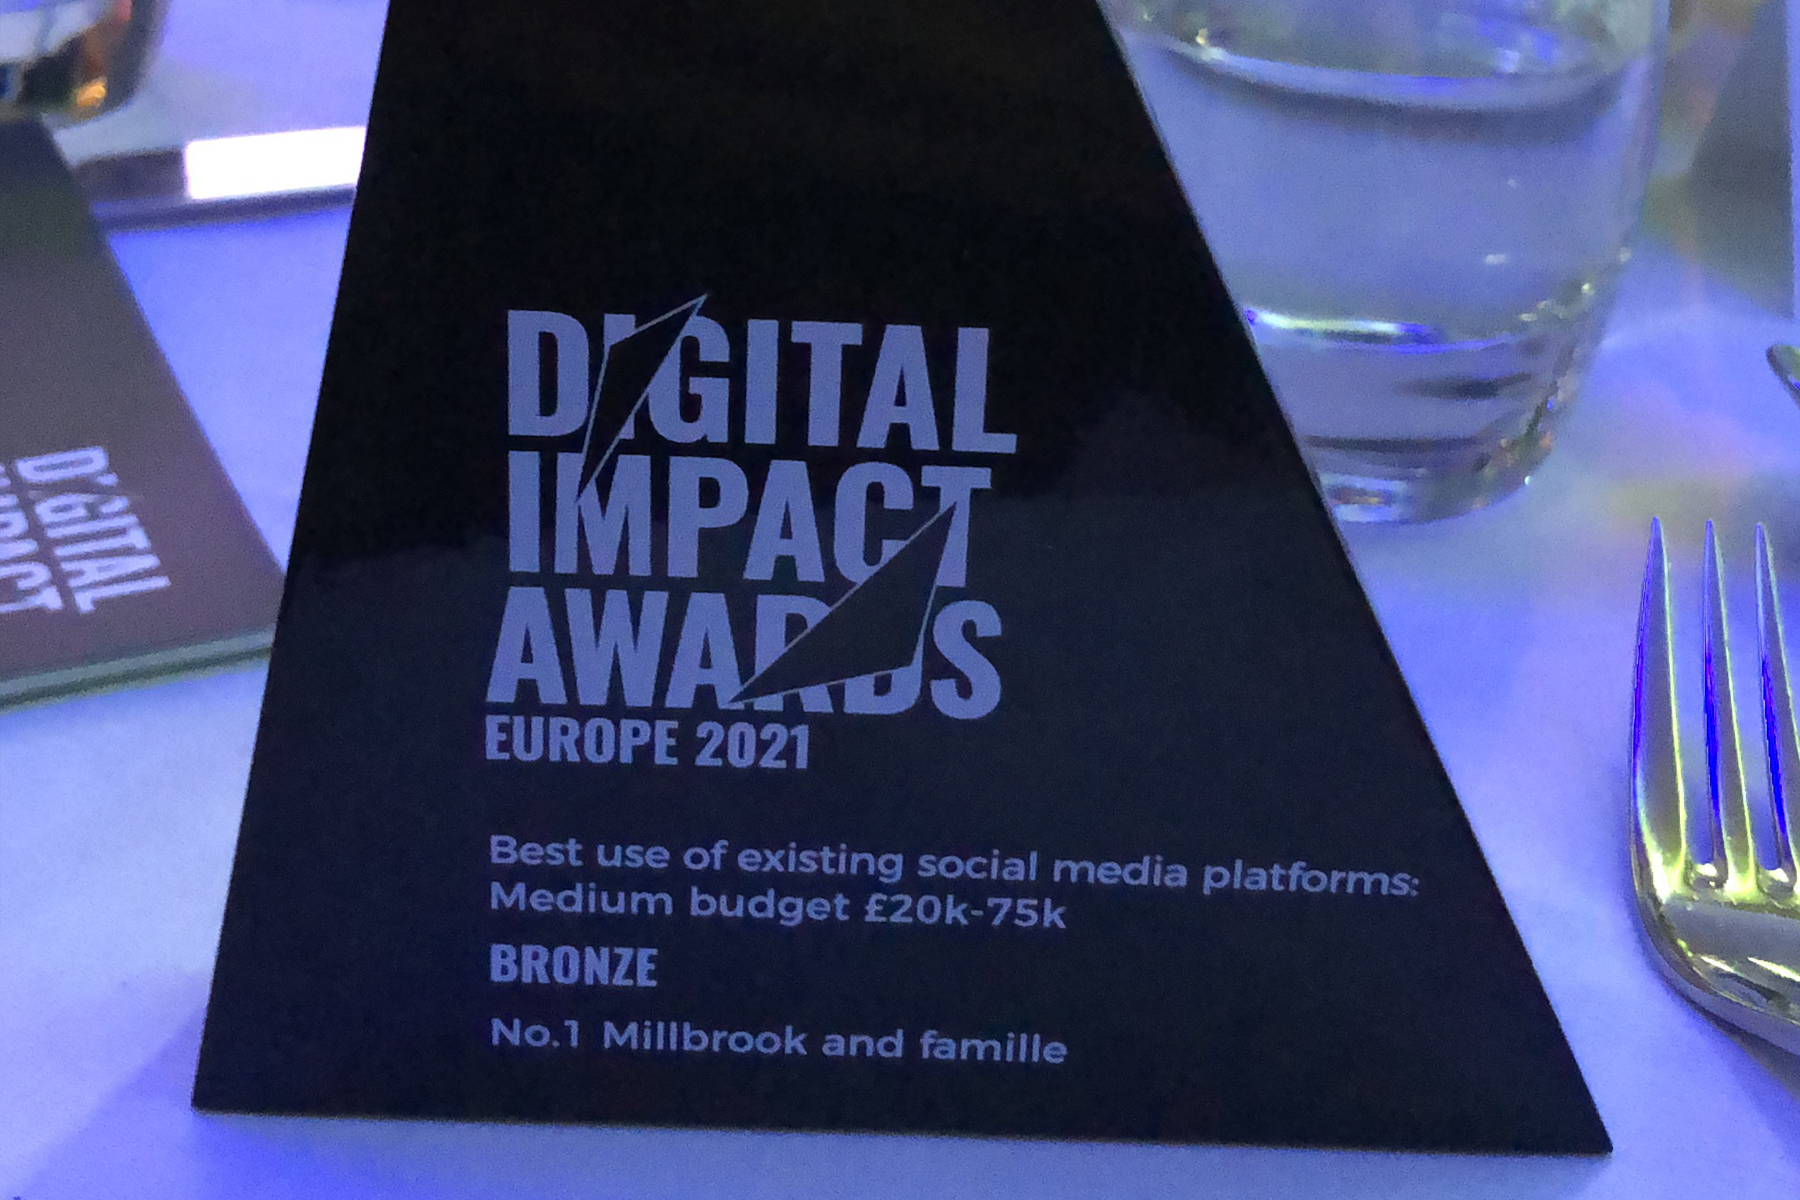 Featured image for “It’s a win for famille and No.1 Millbrook in the Digital Impact Awards”